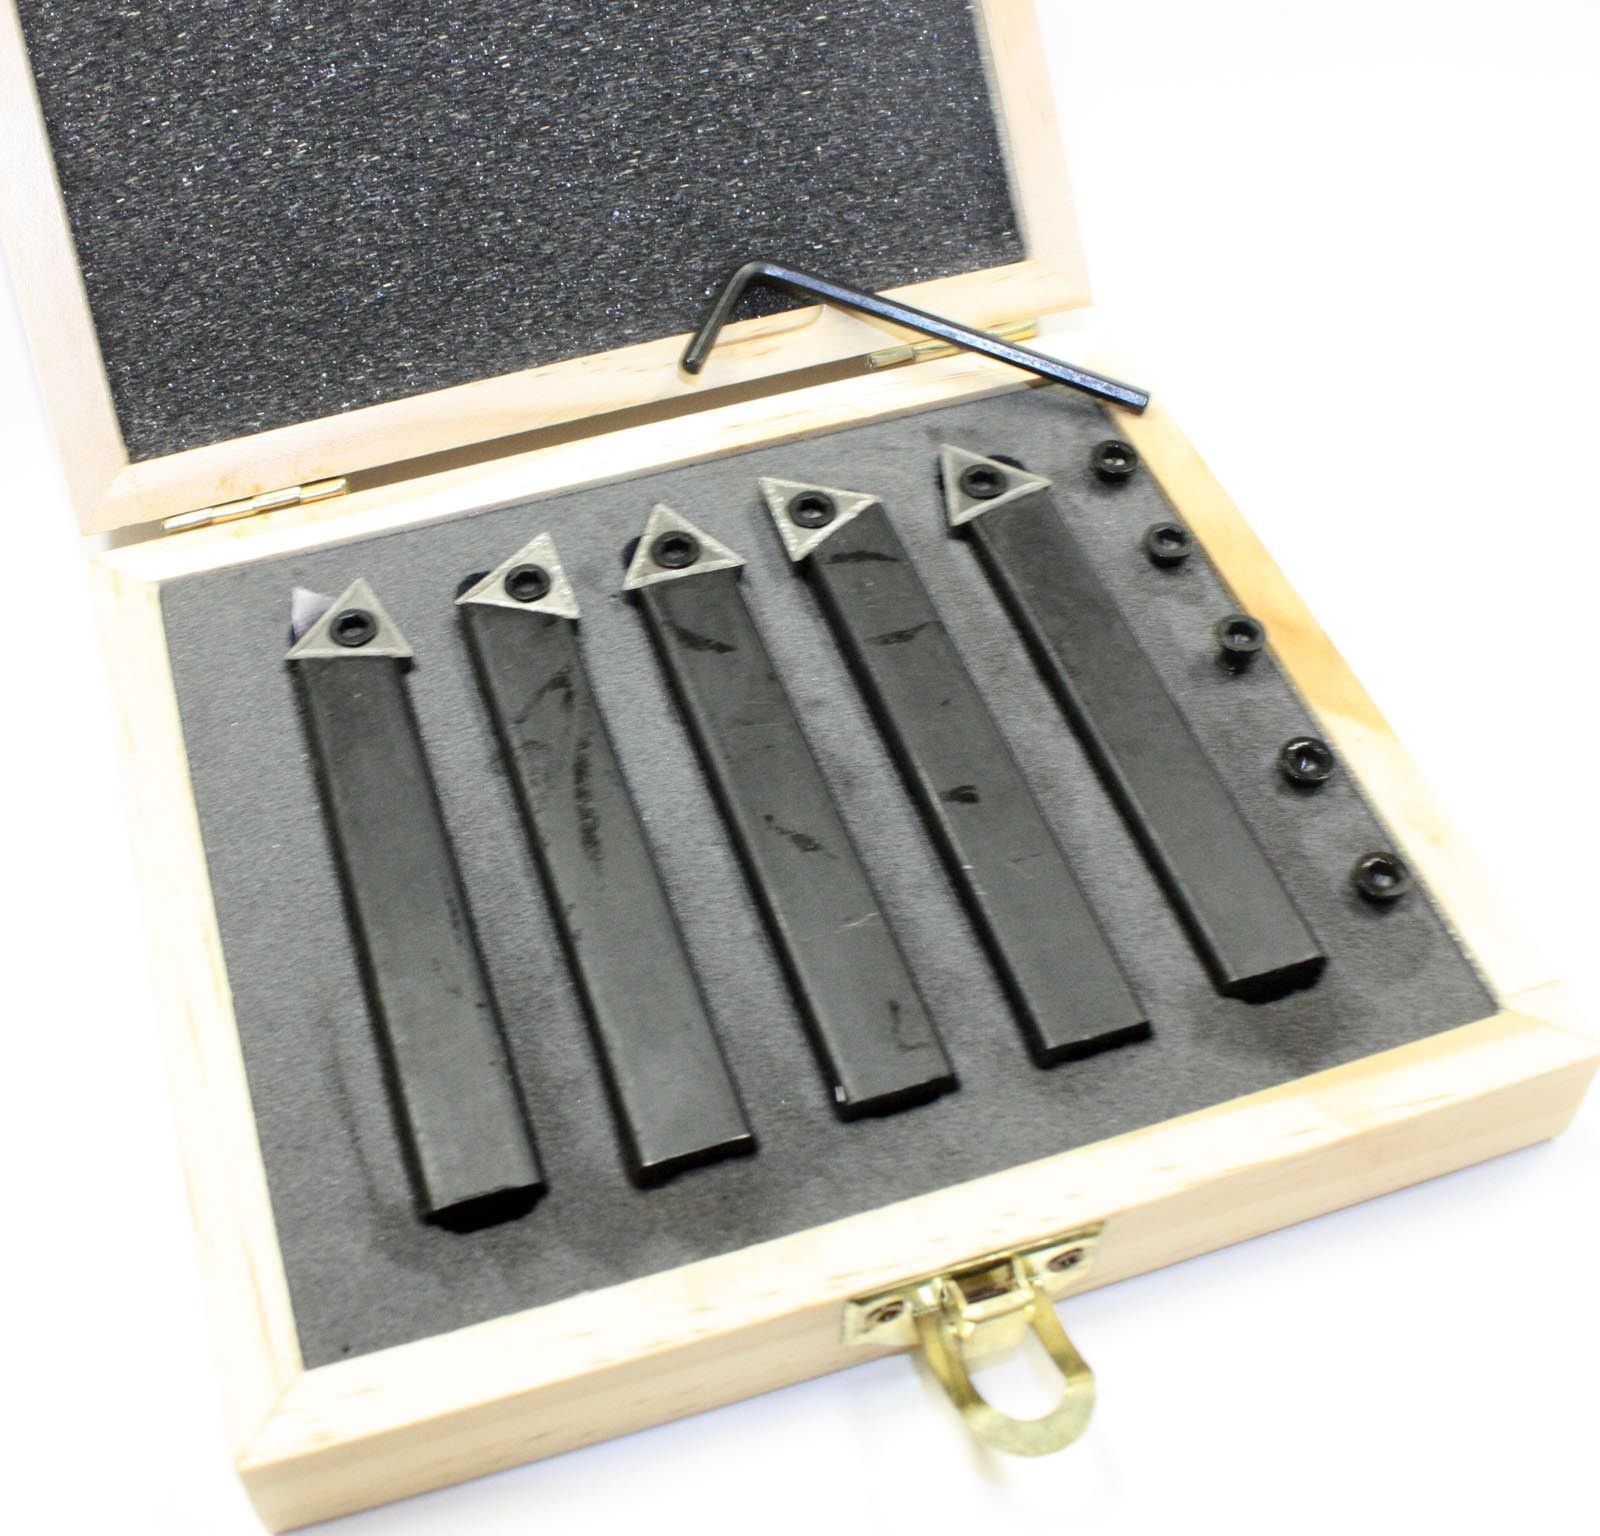 NEW 5pc  1/4" MINI LATHE INDEXABLE CARBIDE INSERT TOOL BIT SET BY CENTRAL MACH.